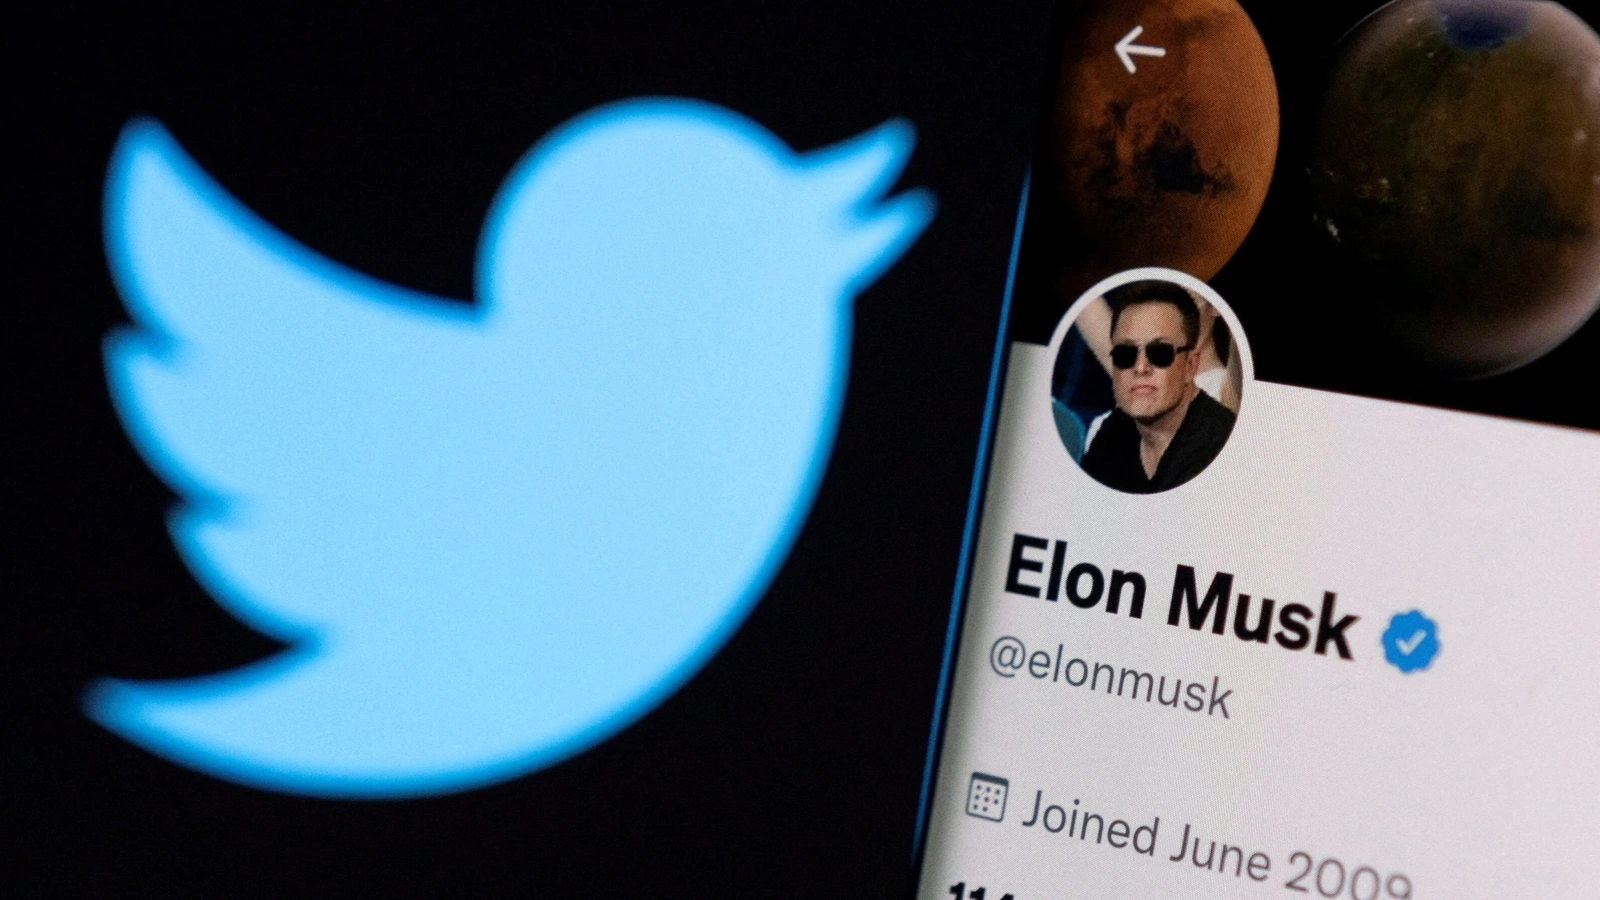 How Elon Musk became Twitter’s most influential investor: Timeline